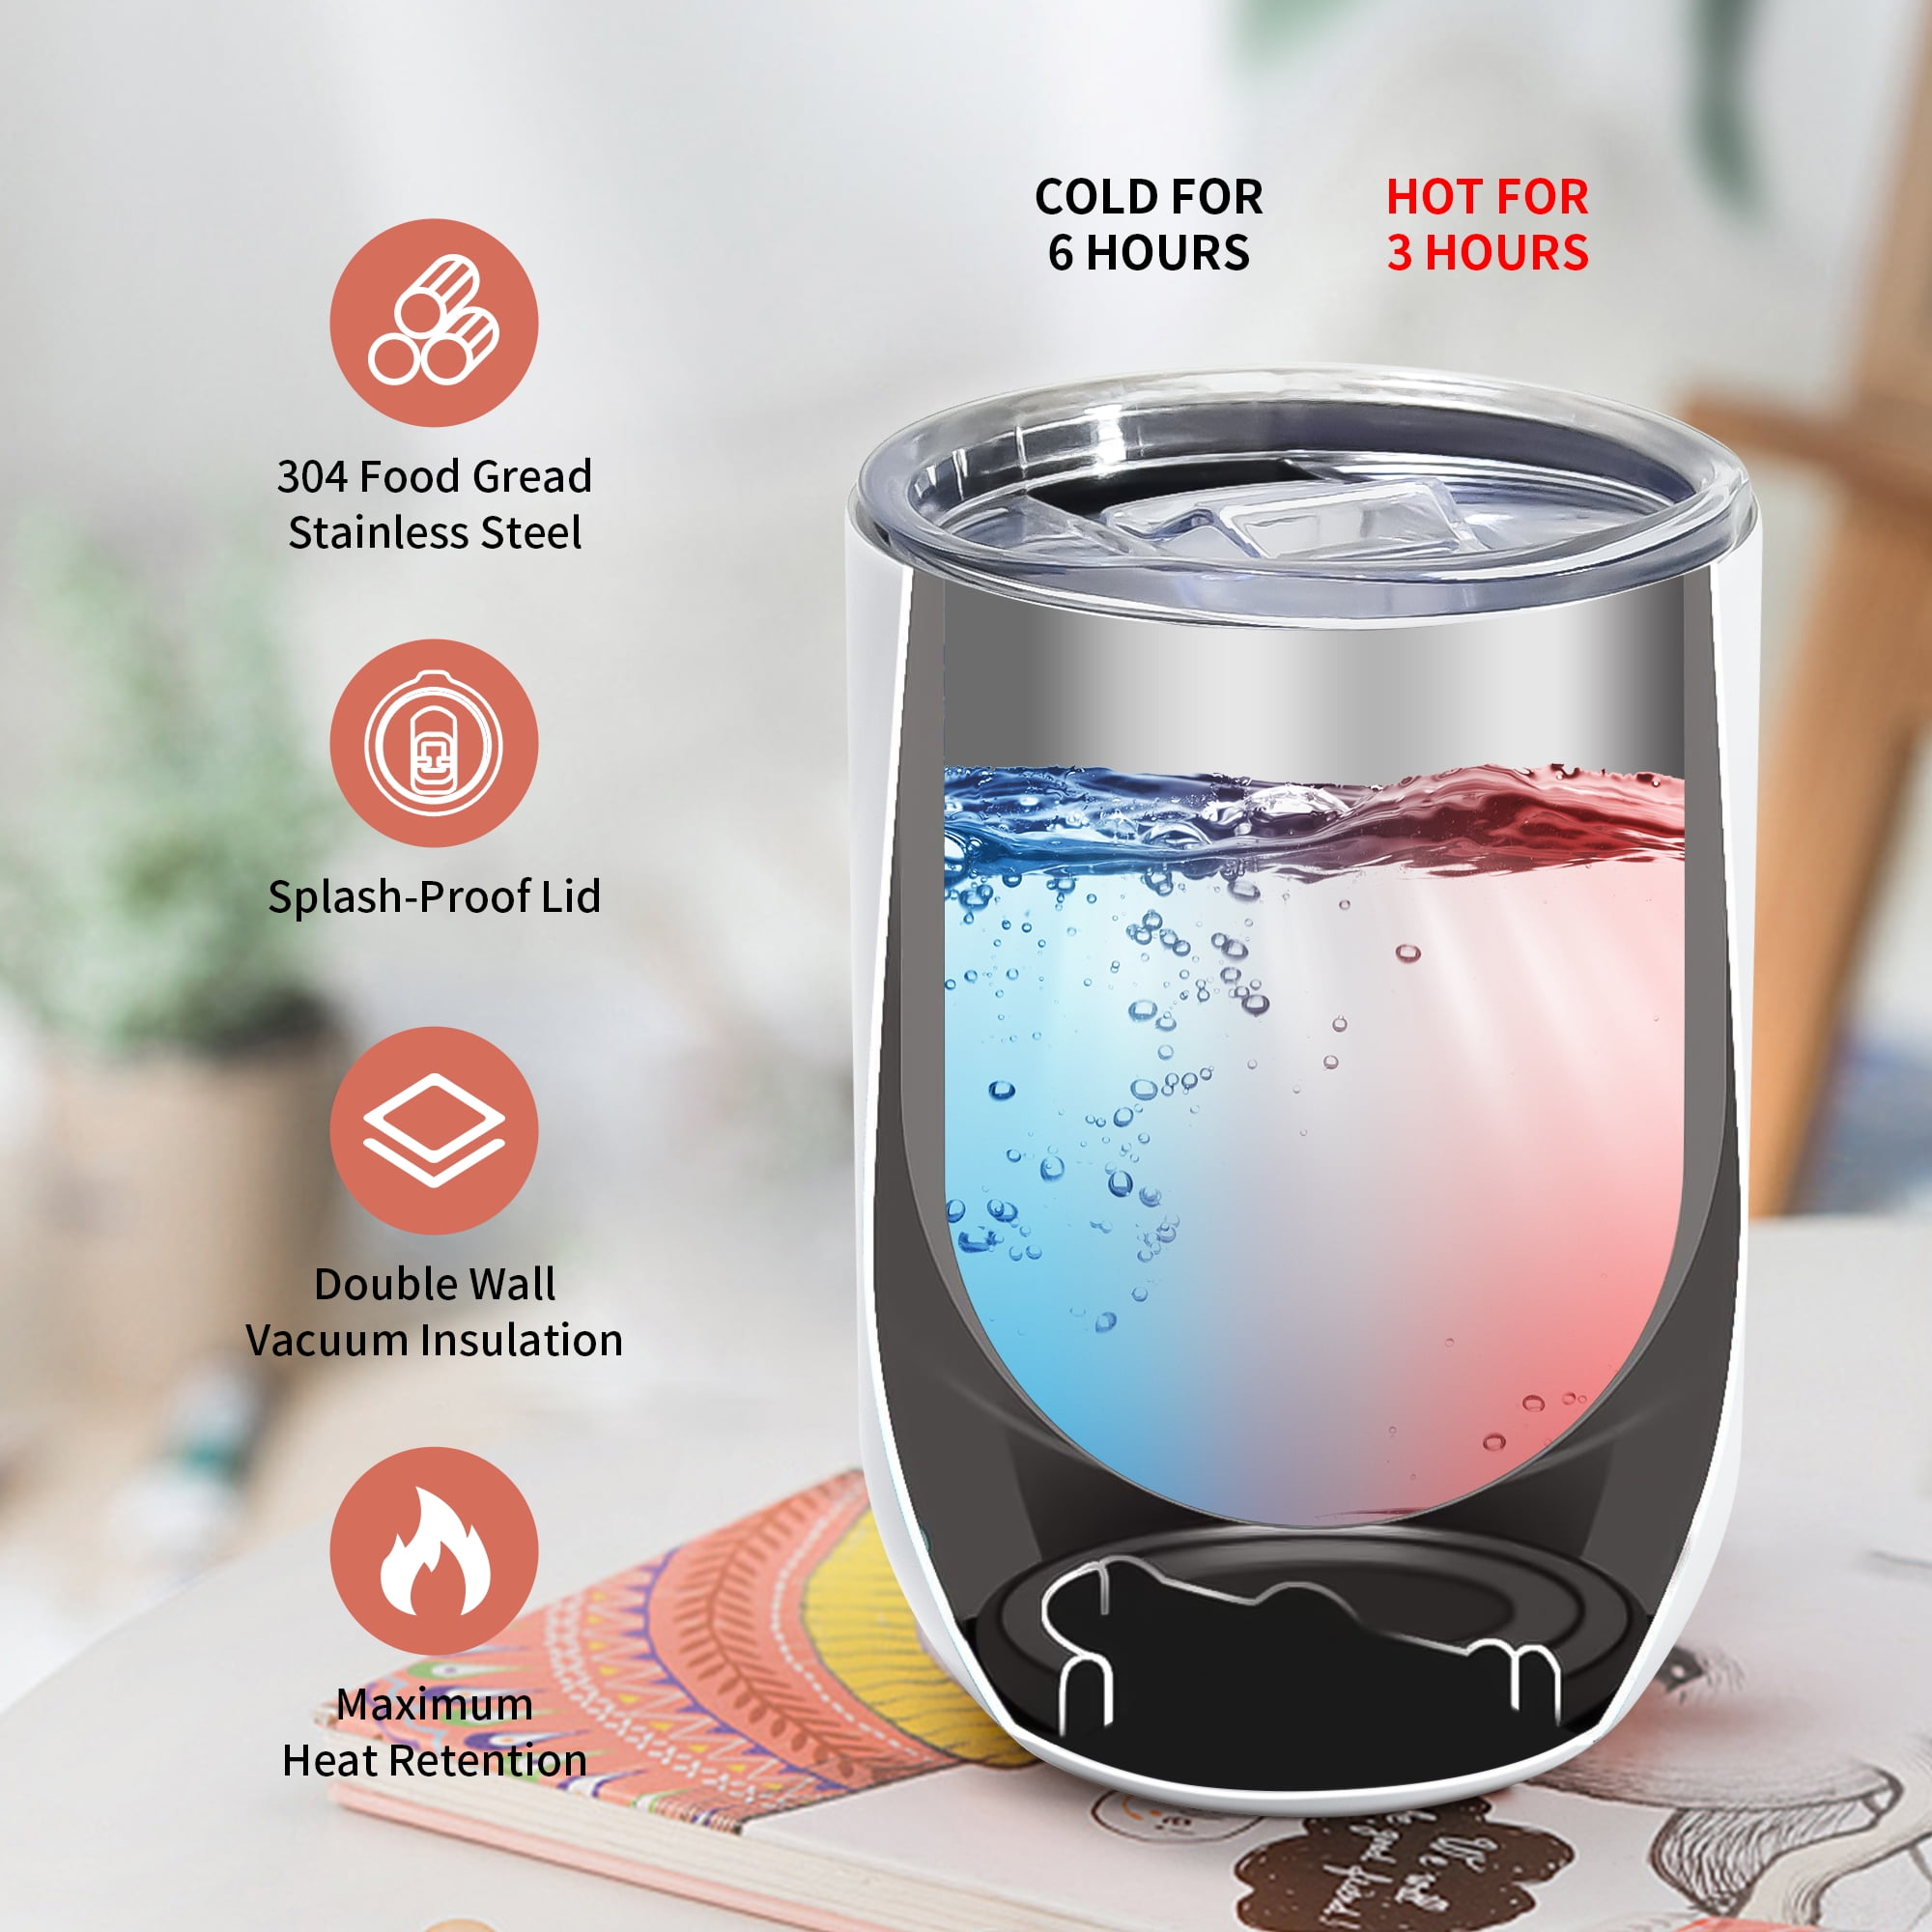 Craft Express 6 Pack of Stemless Stainless Steel Sublimation Wine Tumbler